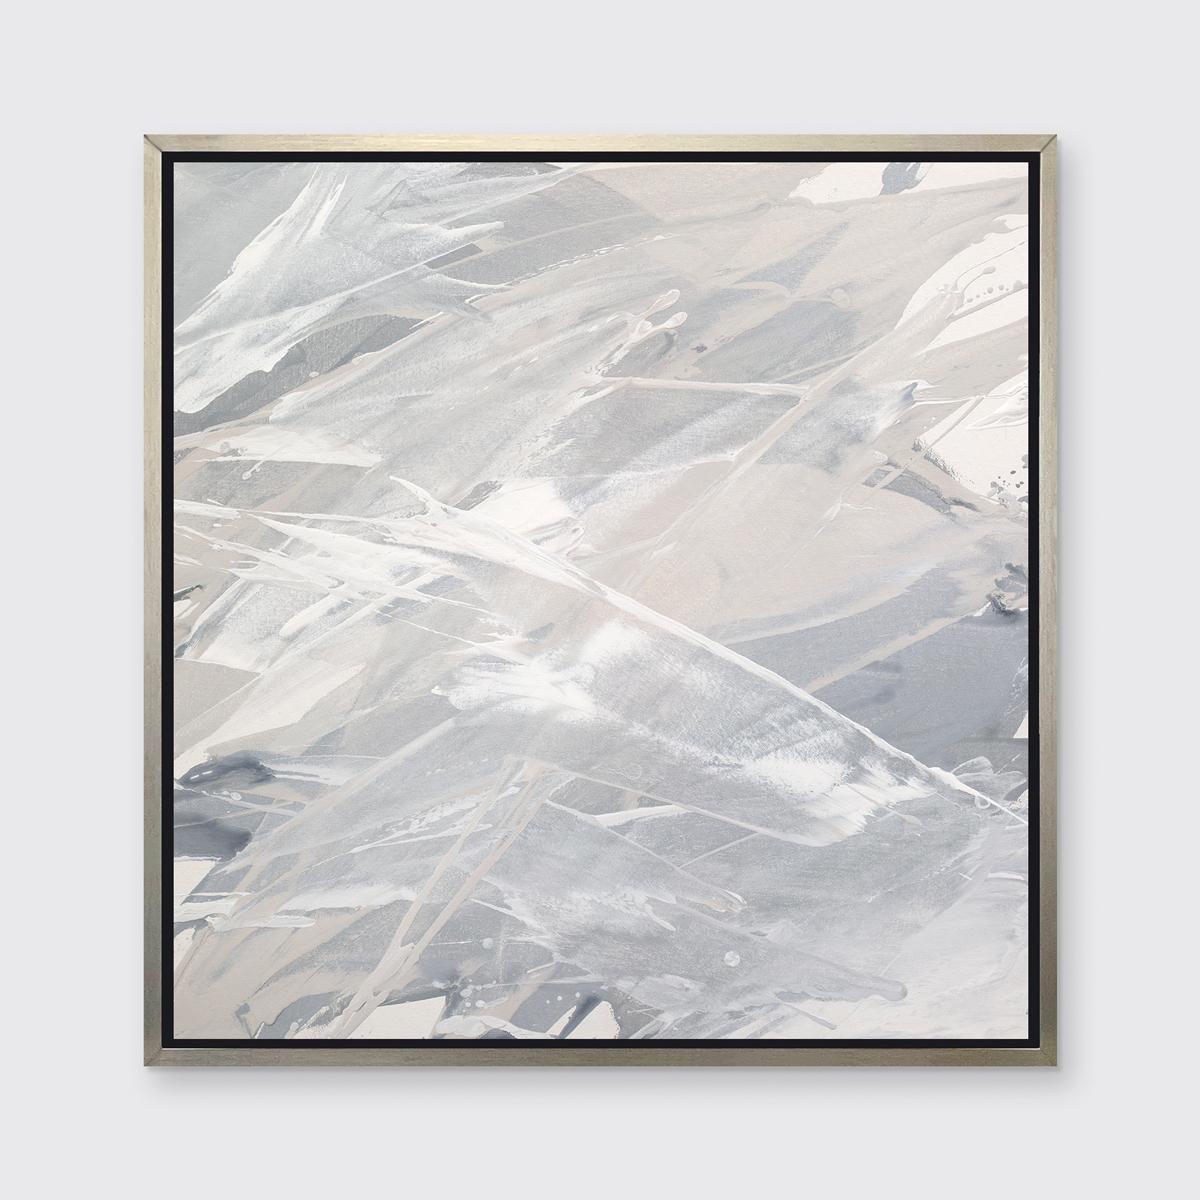 This contemporary limited edition print by Teodora Guererra features a warm grey and white palette, with layers of neutral colors that almost splash across the composition. This print pairs beautifully with the Grey Goose II limited edition print by